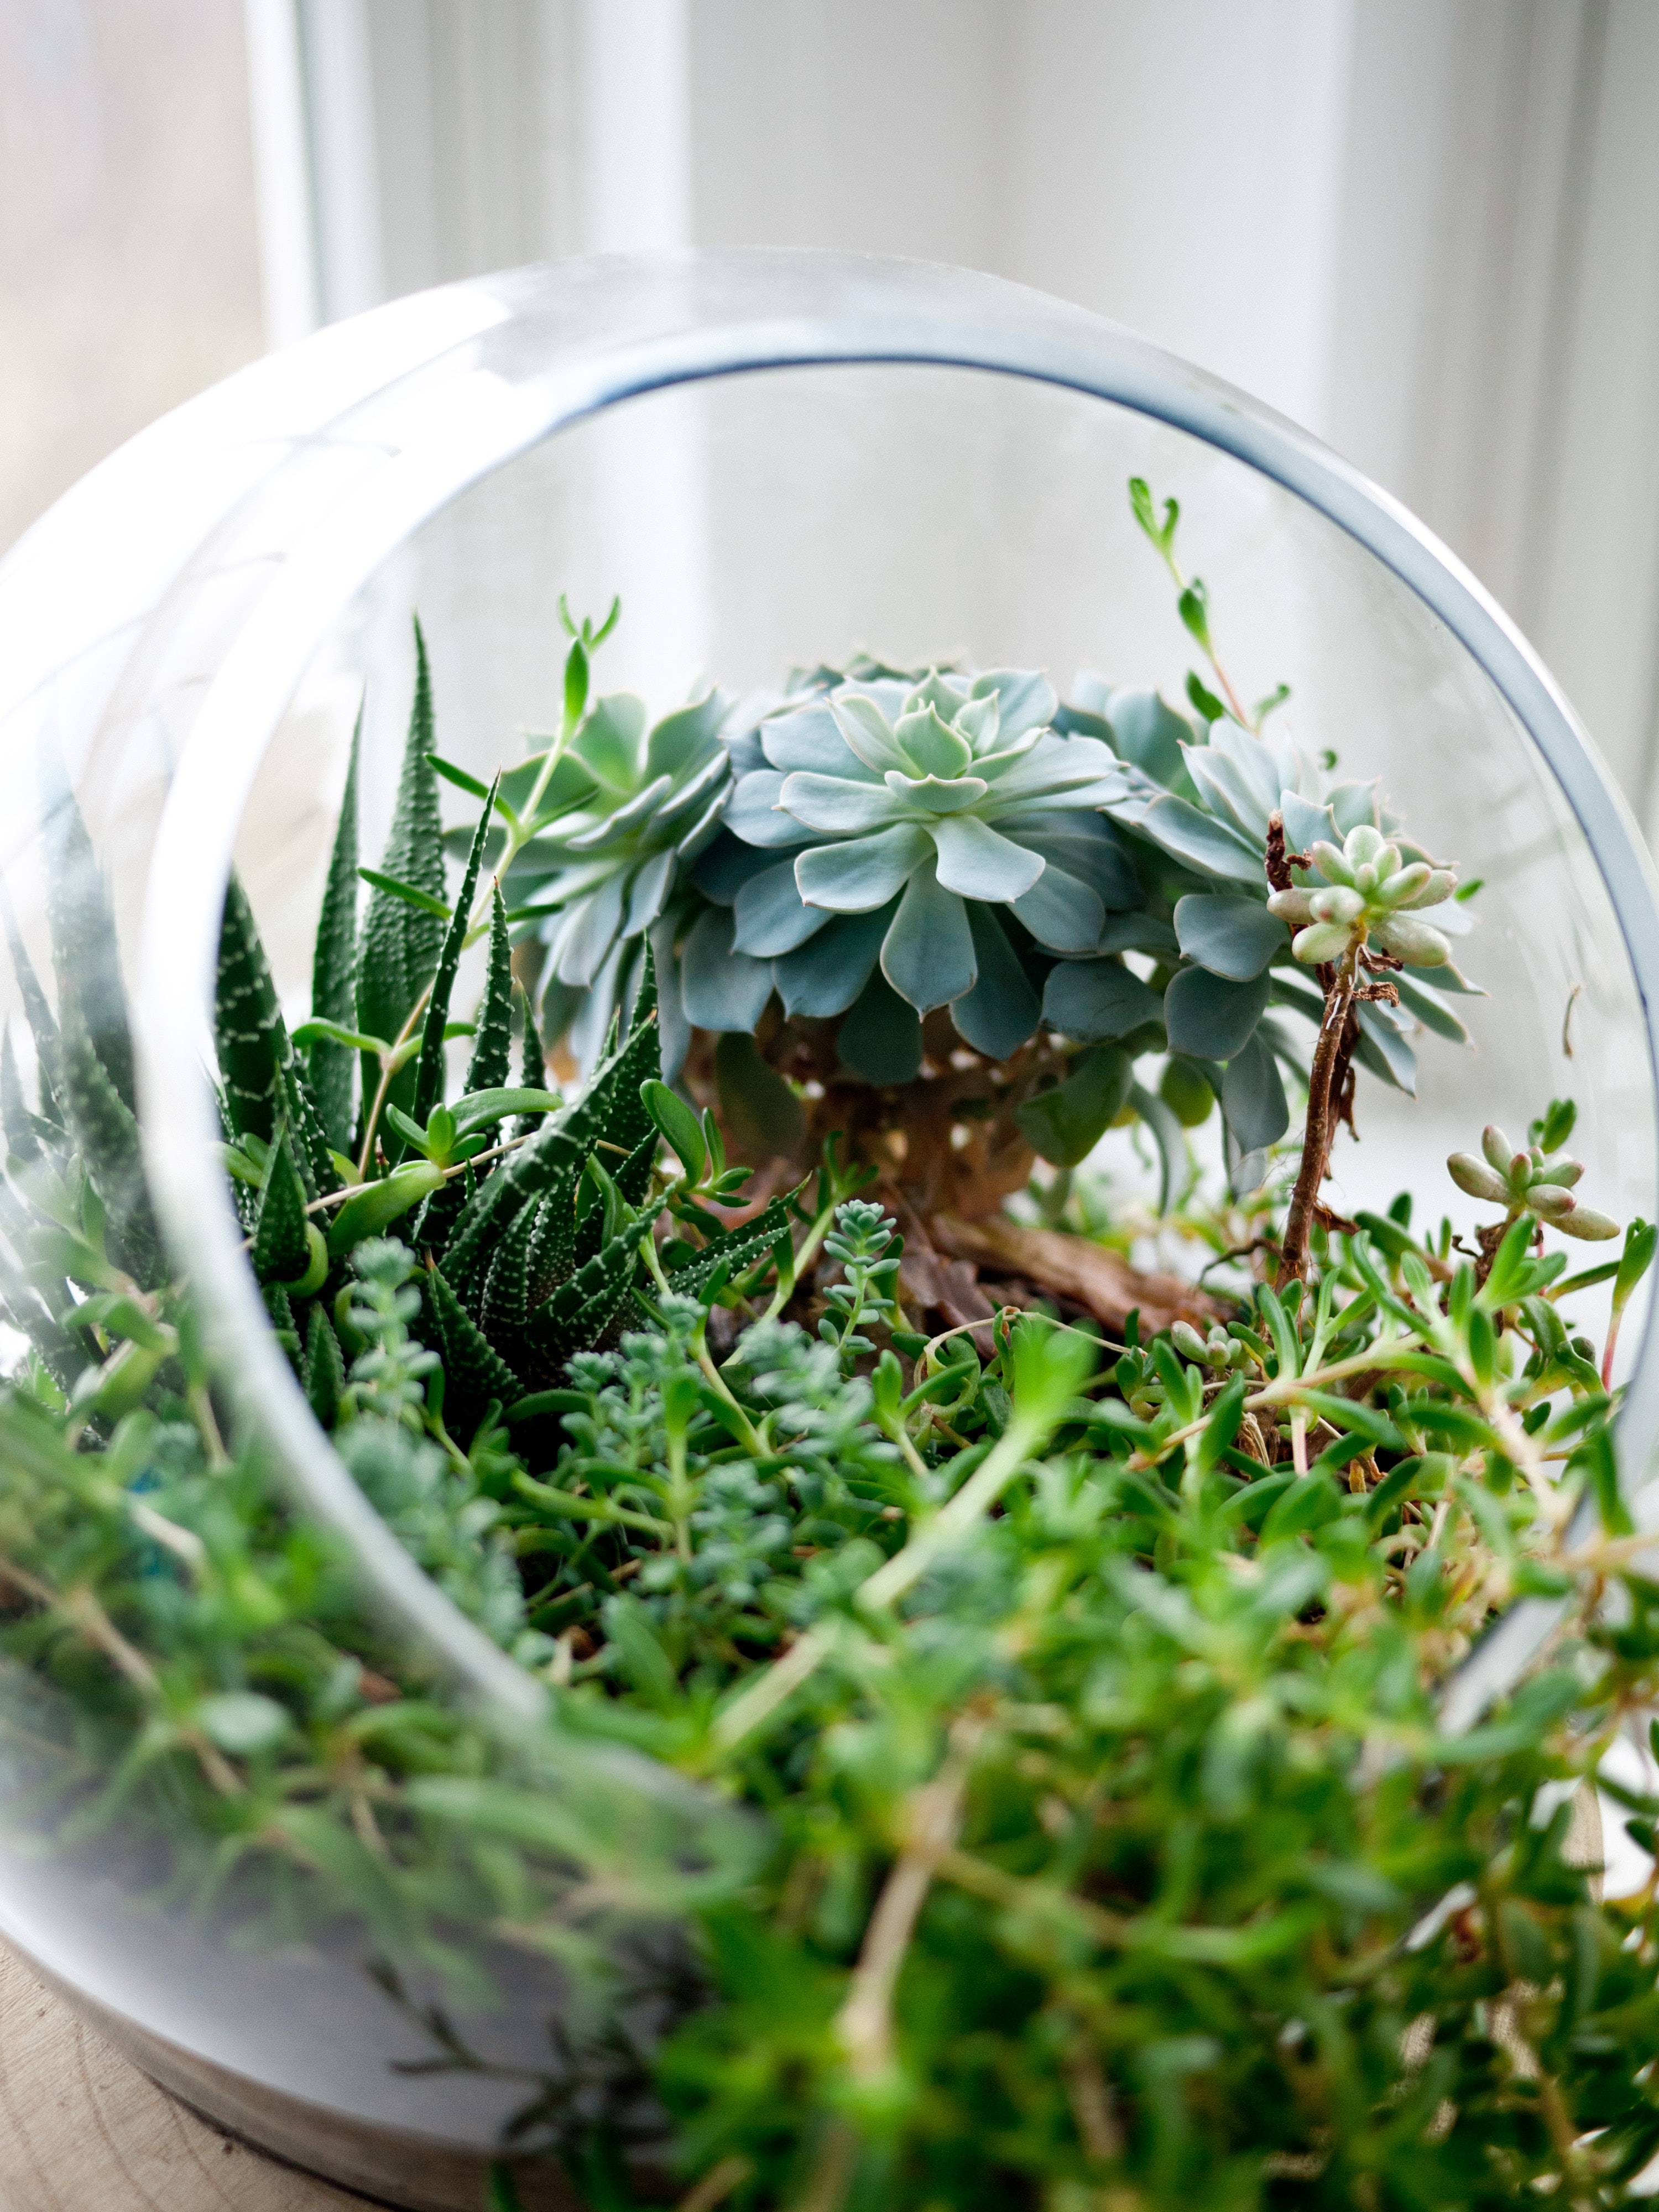 Small plants of different textures planted in a glass bowl with hole on side. 